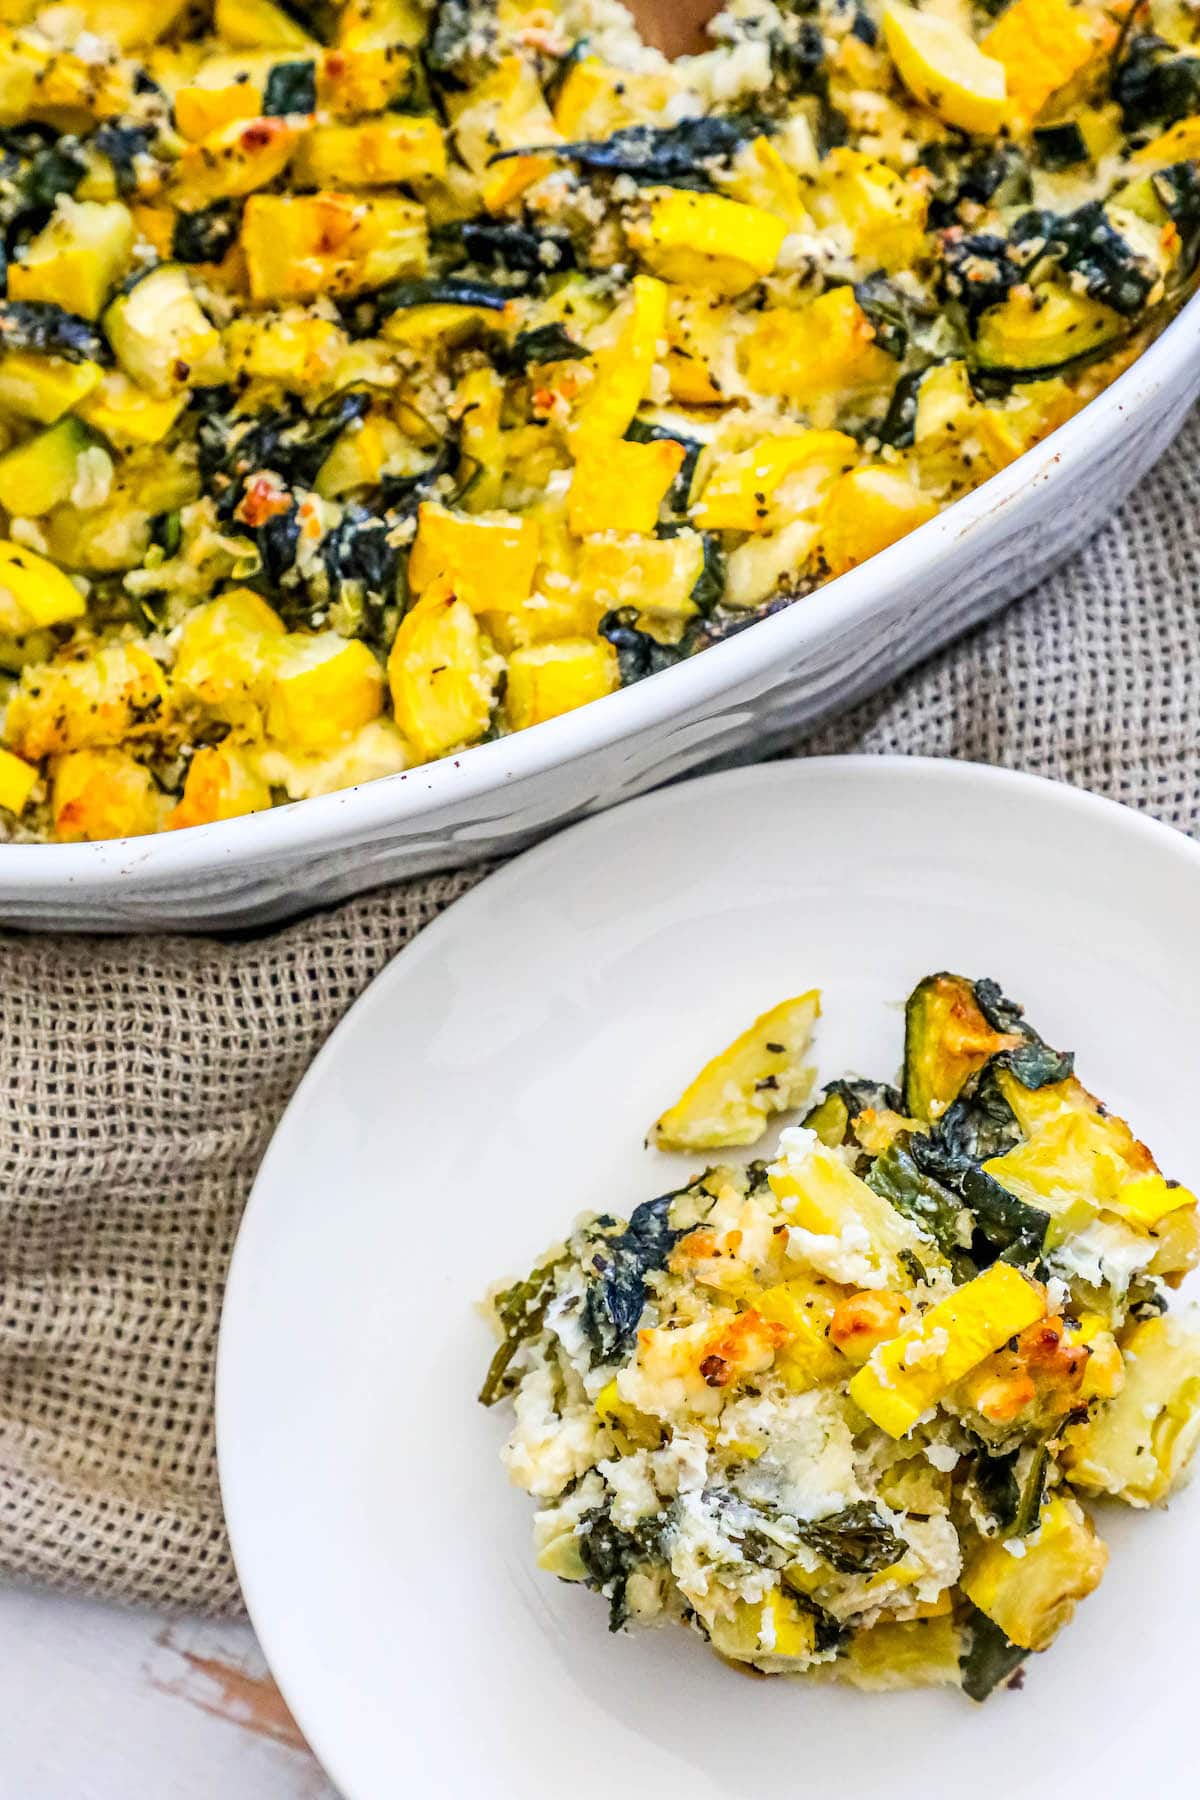 picture of spinach and zucchini feta baked casserole in a white dish with a plate of squash and zucchini scooped onto it